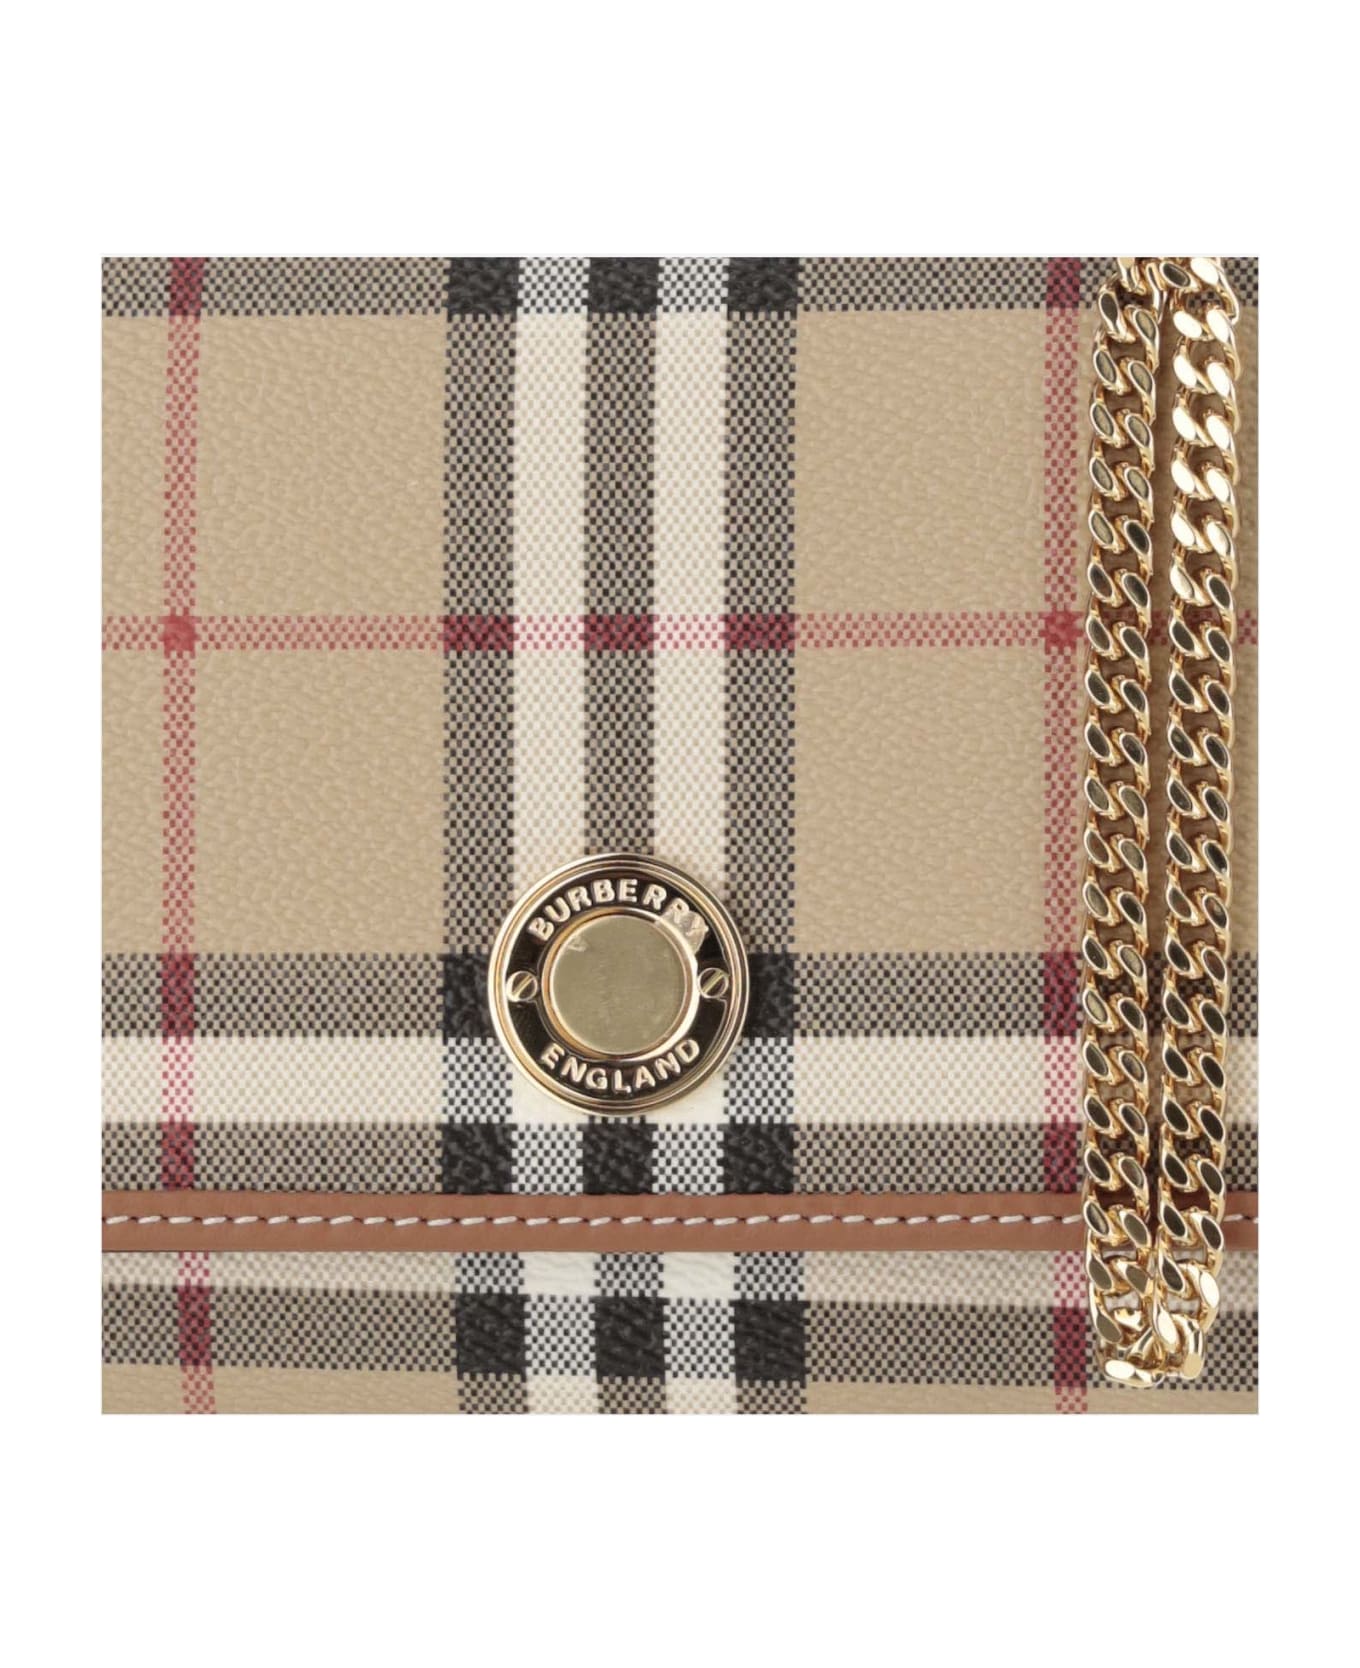 Burberry Check Wallet With Chain Strap - Red